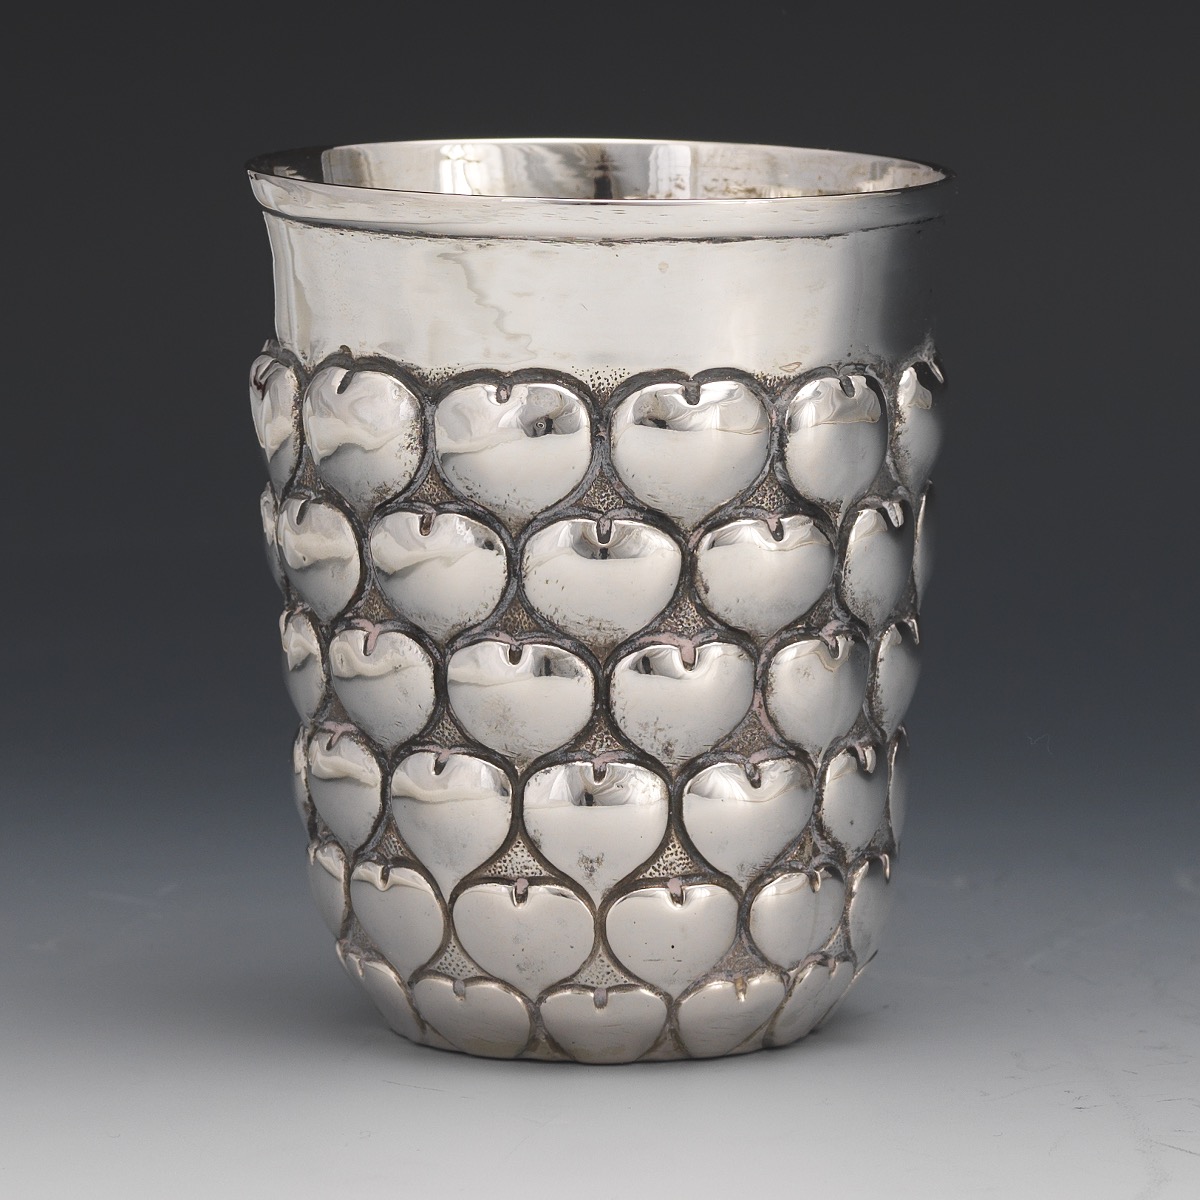 German Silver Cup in Style of Medieval 14th Century, by Ludwig Nereshelmer, Hanau - Image 2 of 7